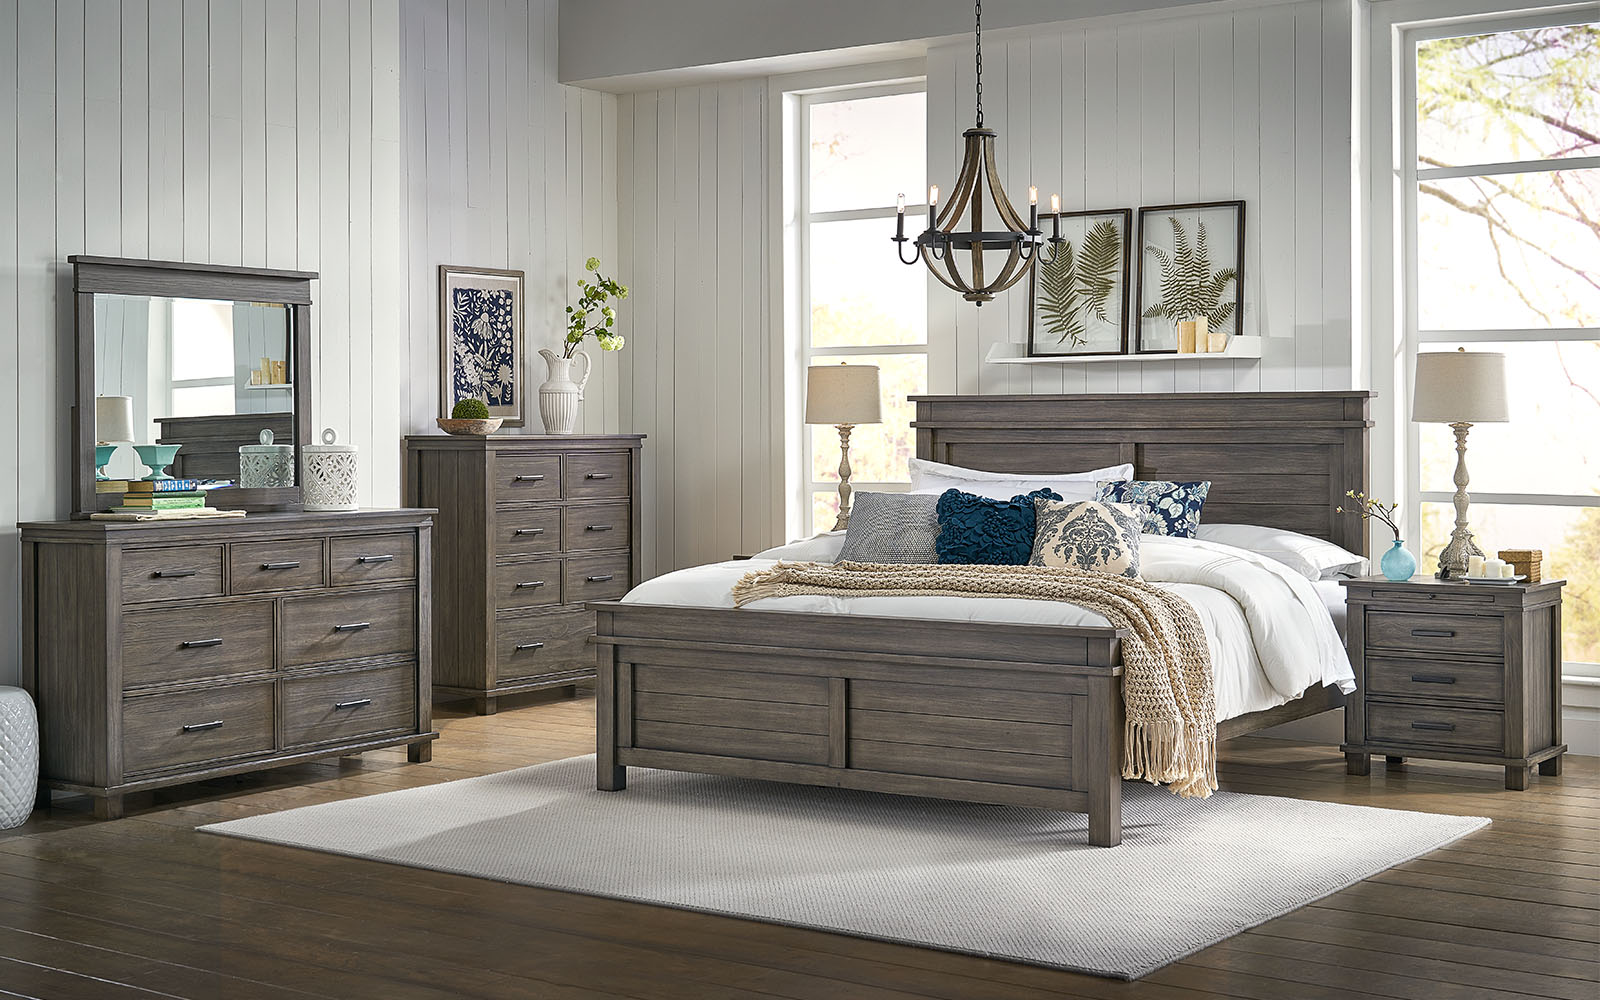 Come See Our Selection of Bedroom Sets